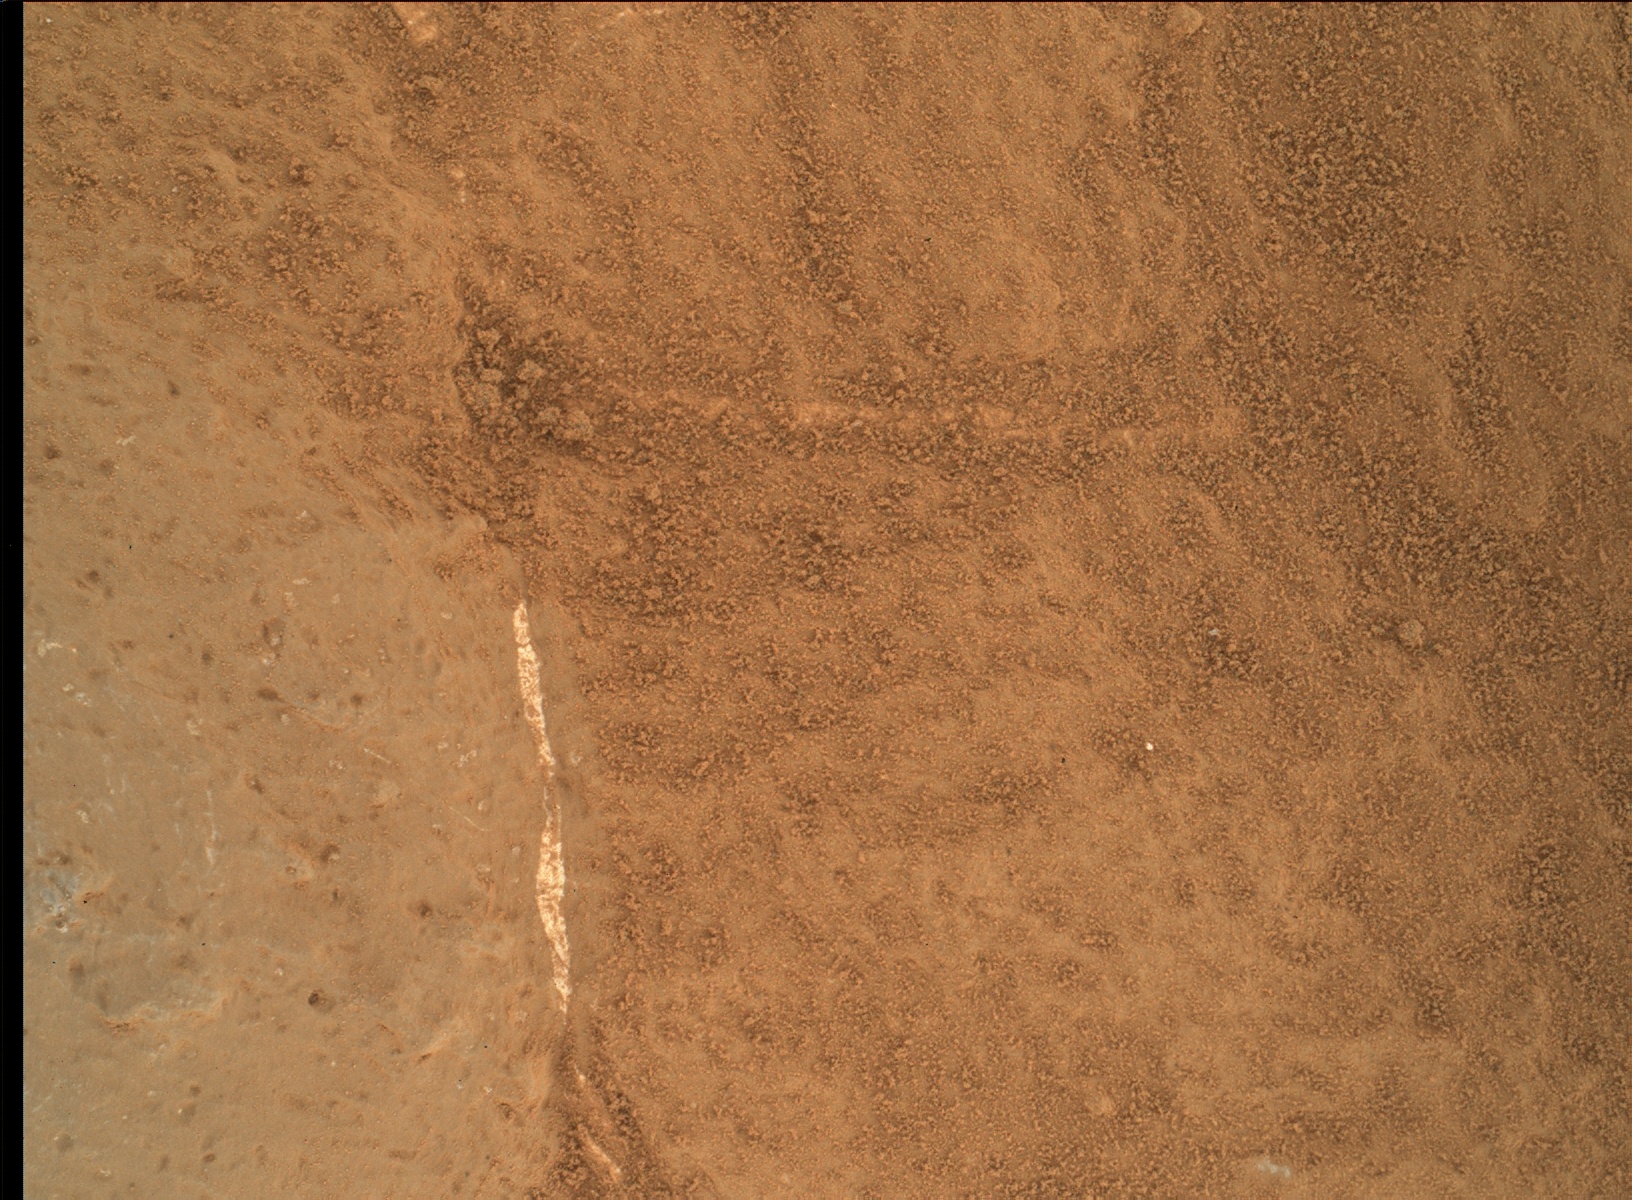 Nasa's Mars rover Curiosity acquired this image using its Mars Hand Lens Imager (MAHLI) on Sol 1059